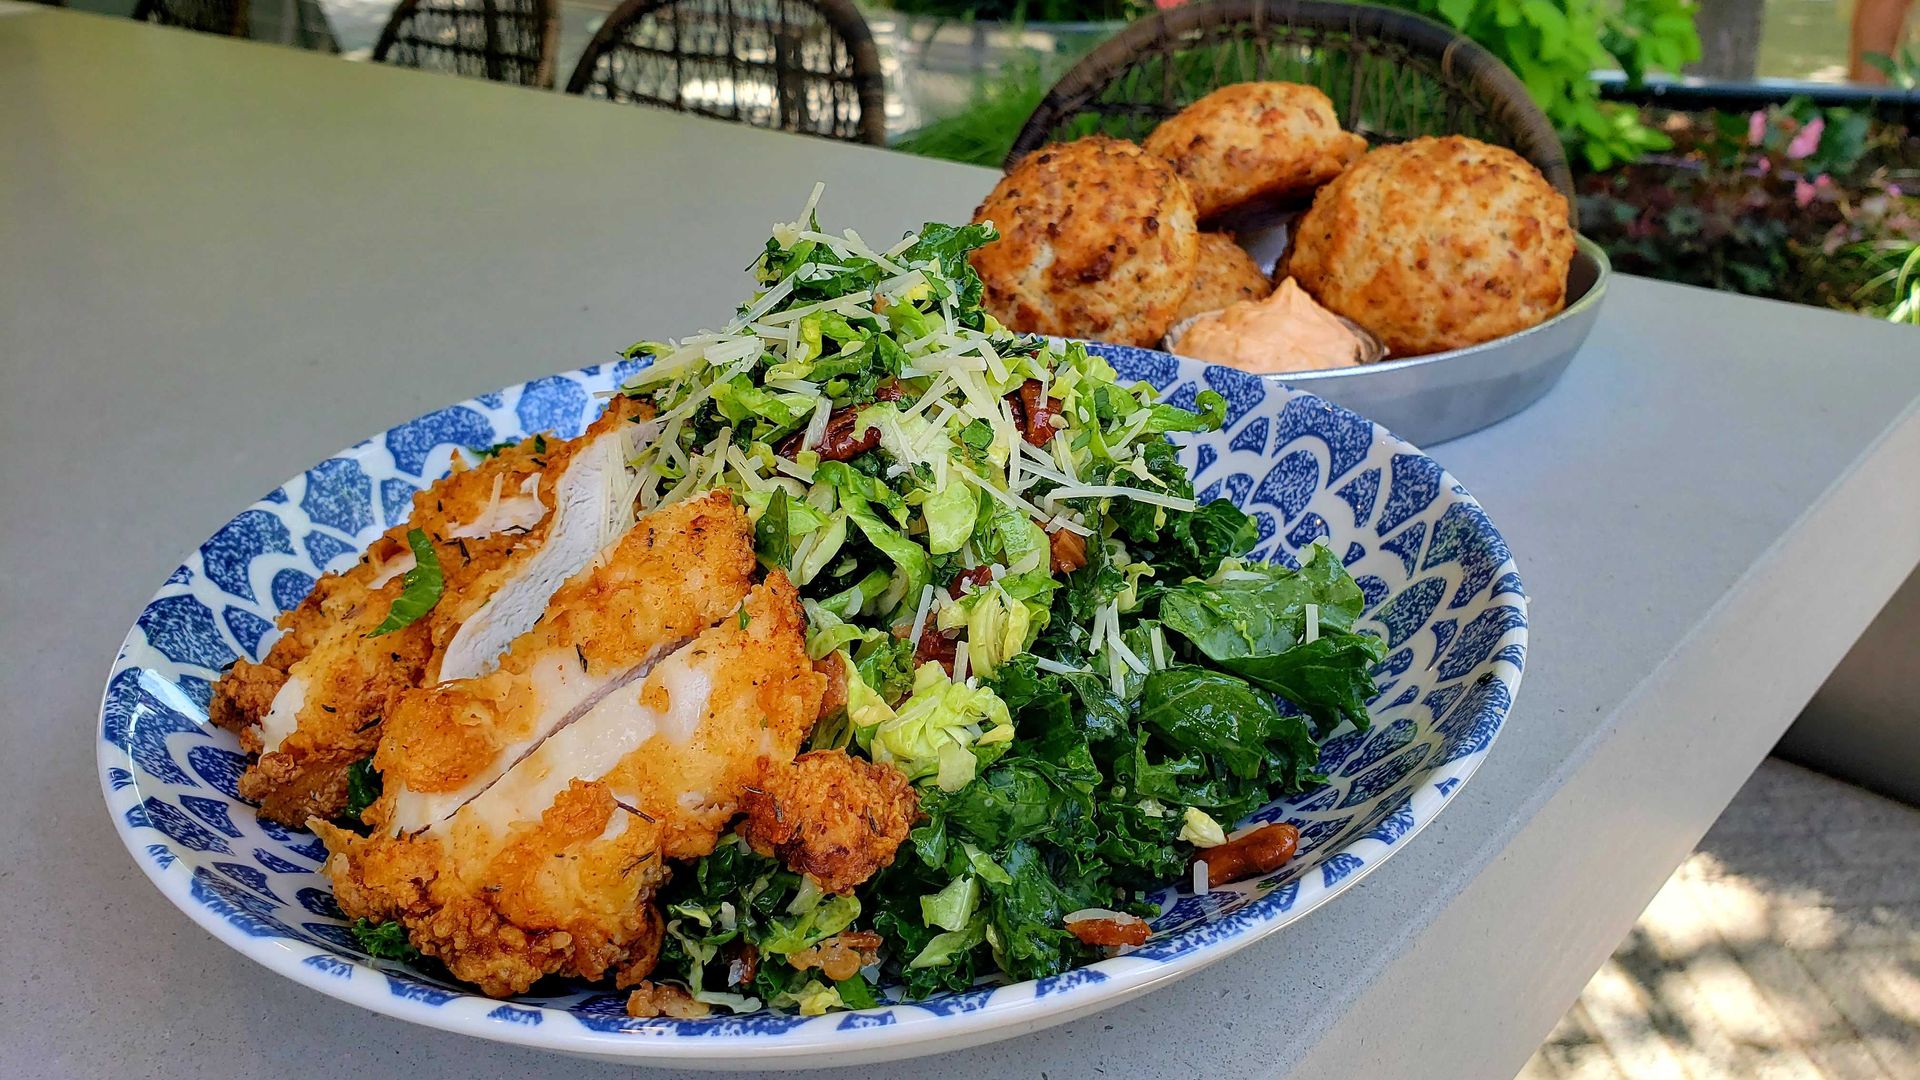 Fried chicken salad and biscuits